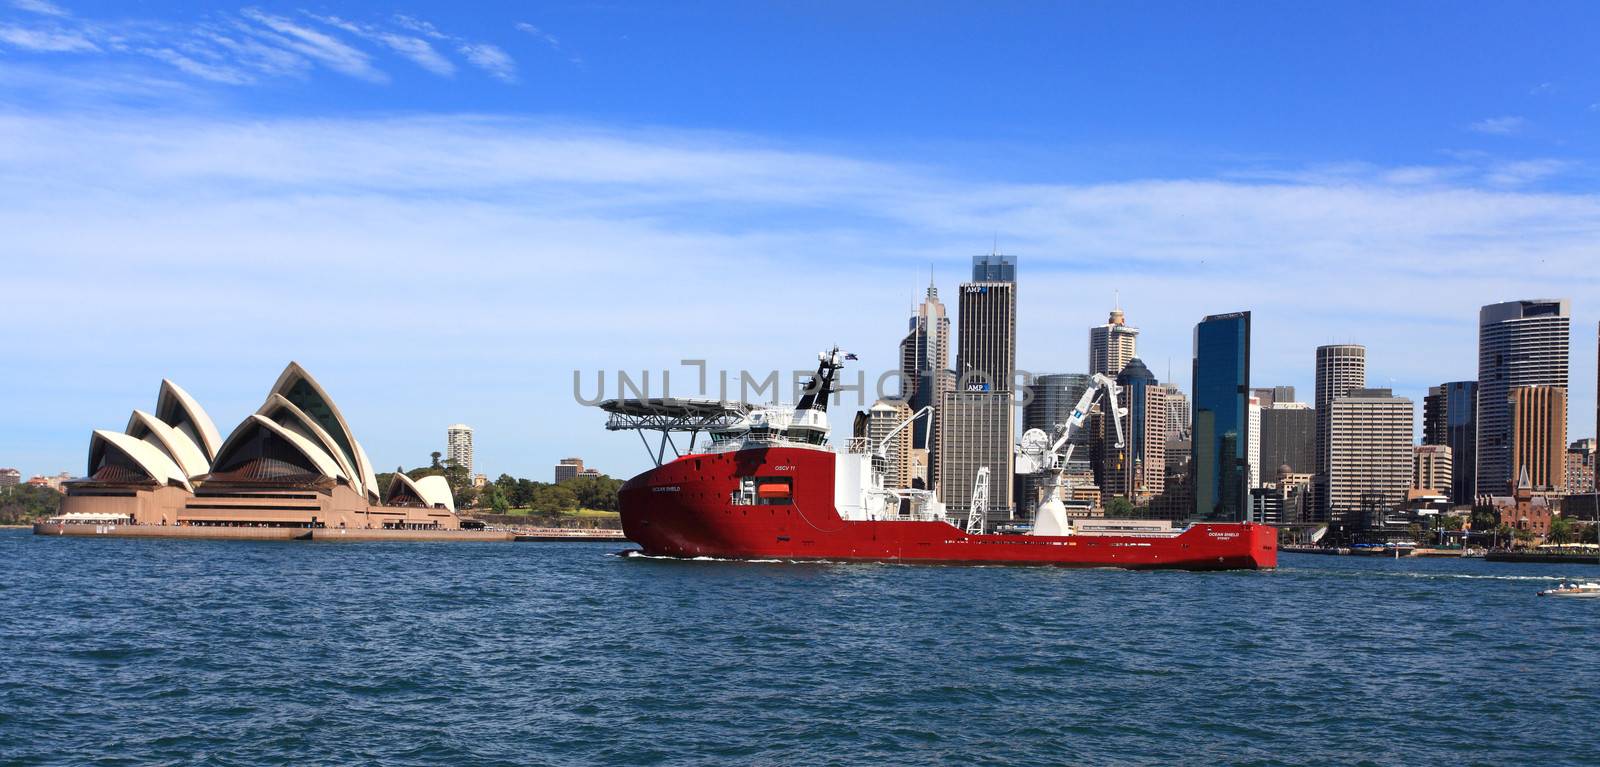 Sydney, Australia - October 6, 2013:  Navy vessel Ocean Shield, sails on Sydney Harbour past the Opera House.  Ocean Shield is used to transport troops for humanitarian and disaster relief operations.  It has a helipad.